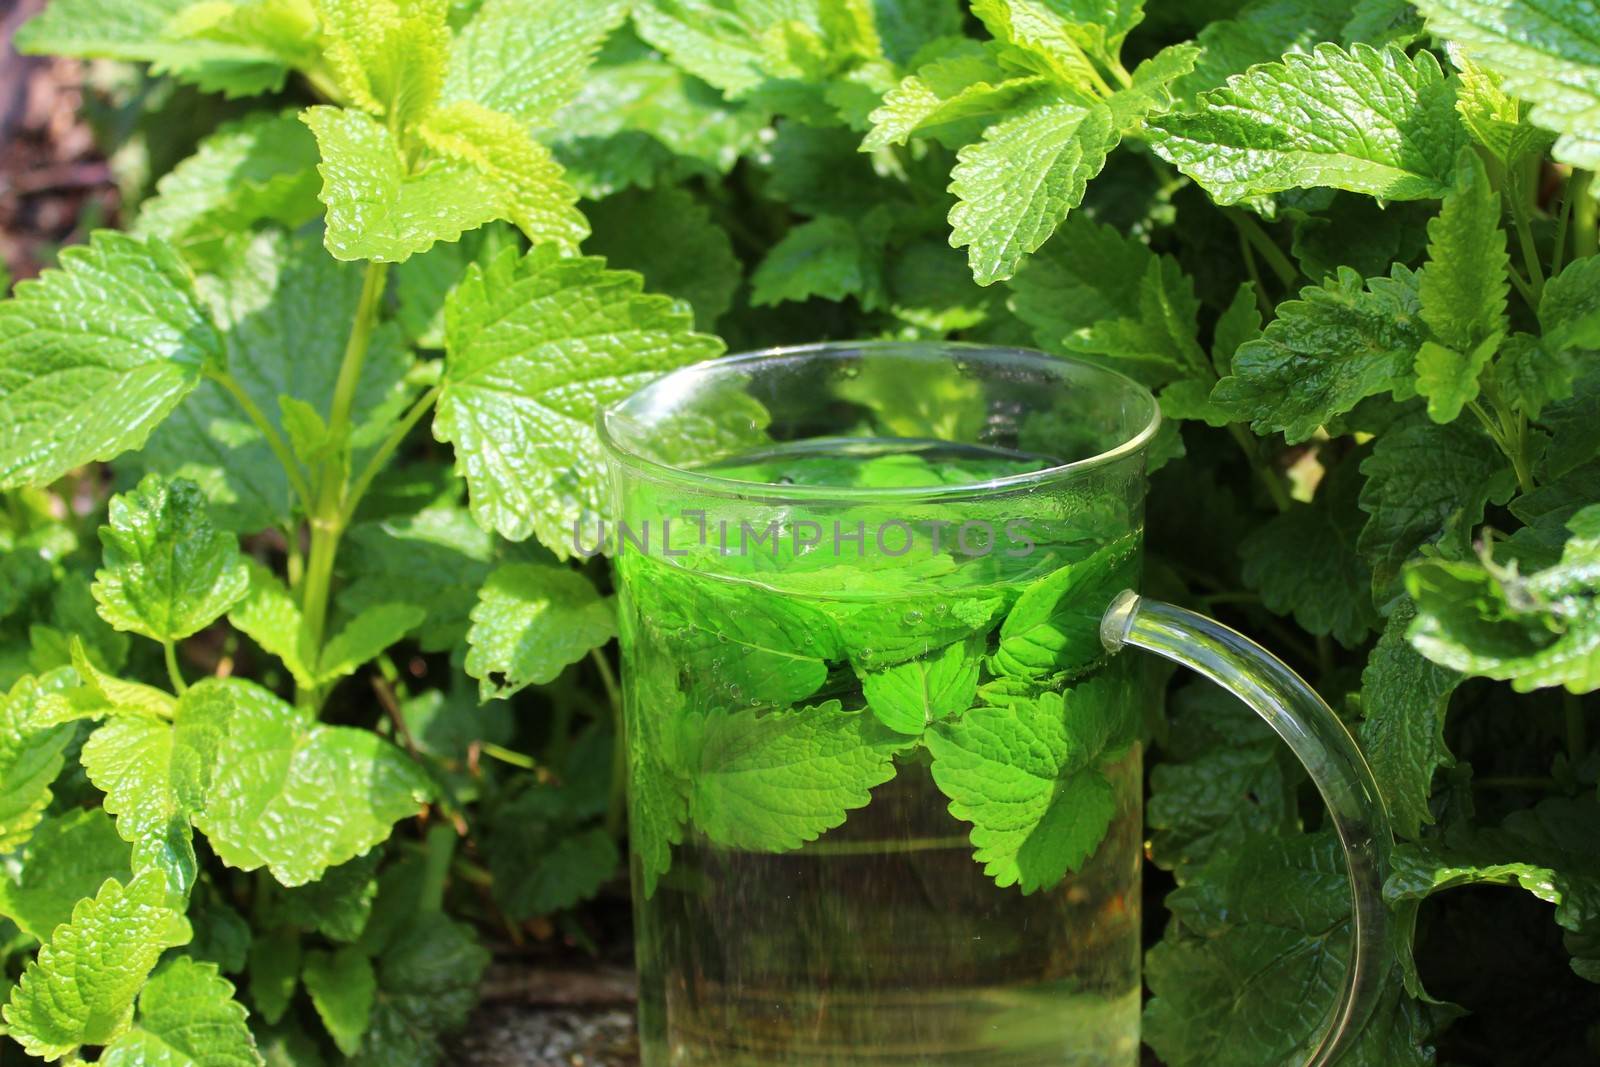 The picture shows lemon balm in the garden